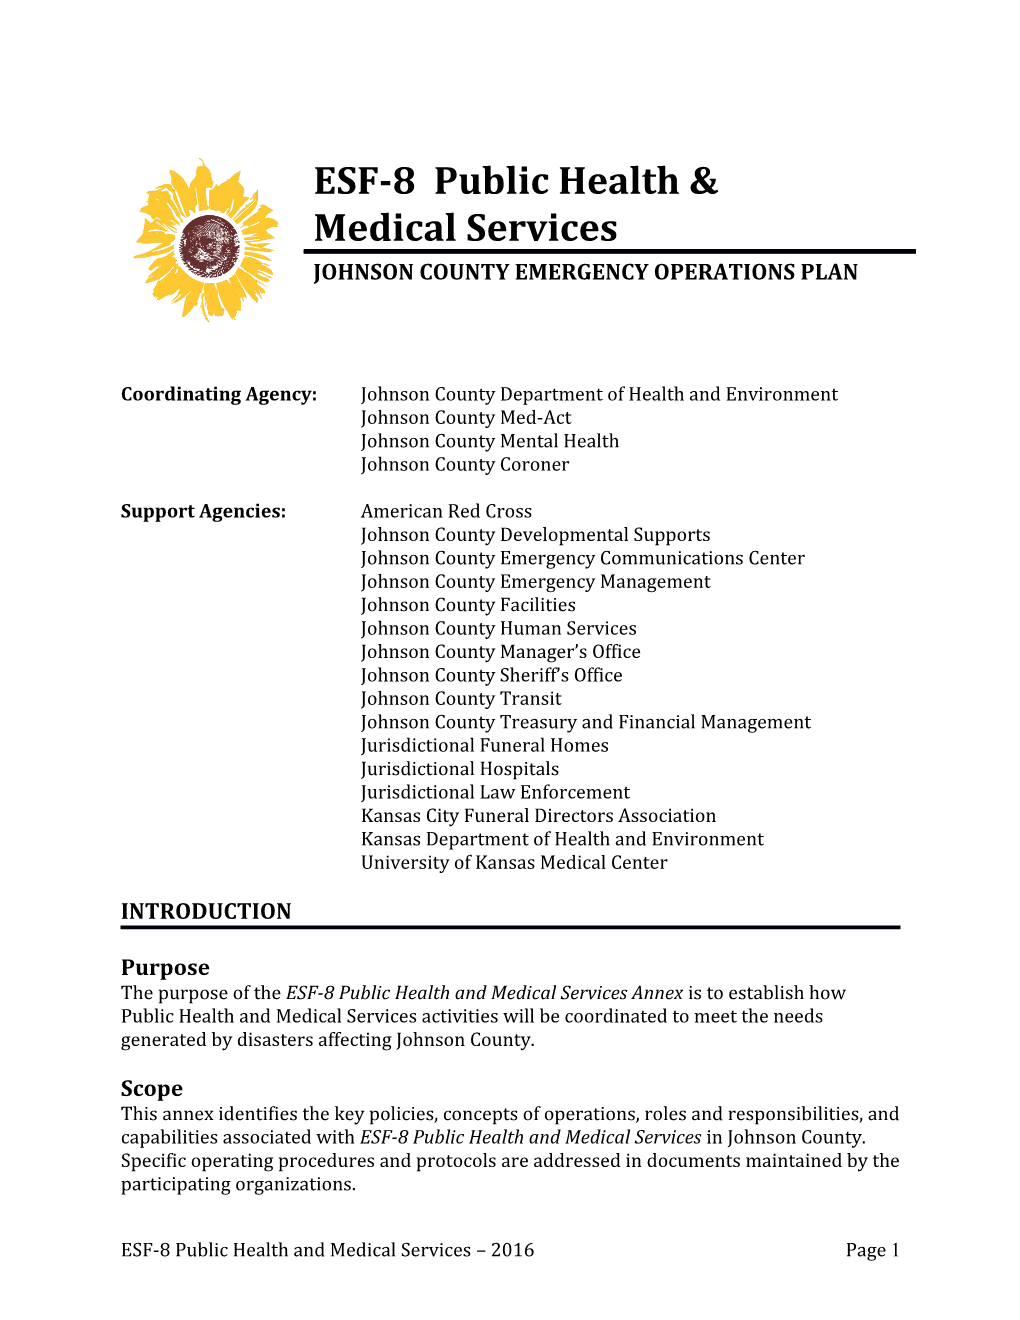 Coordinating Agency: Johnson County Department of Health and Environment